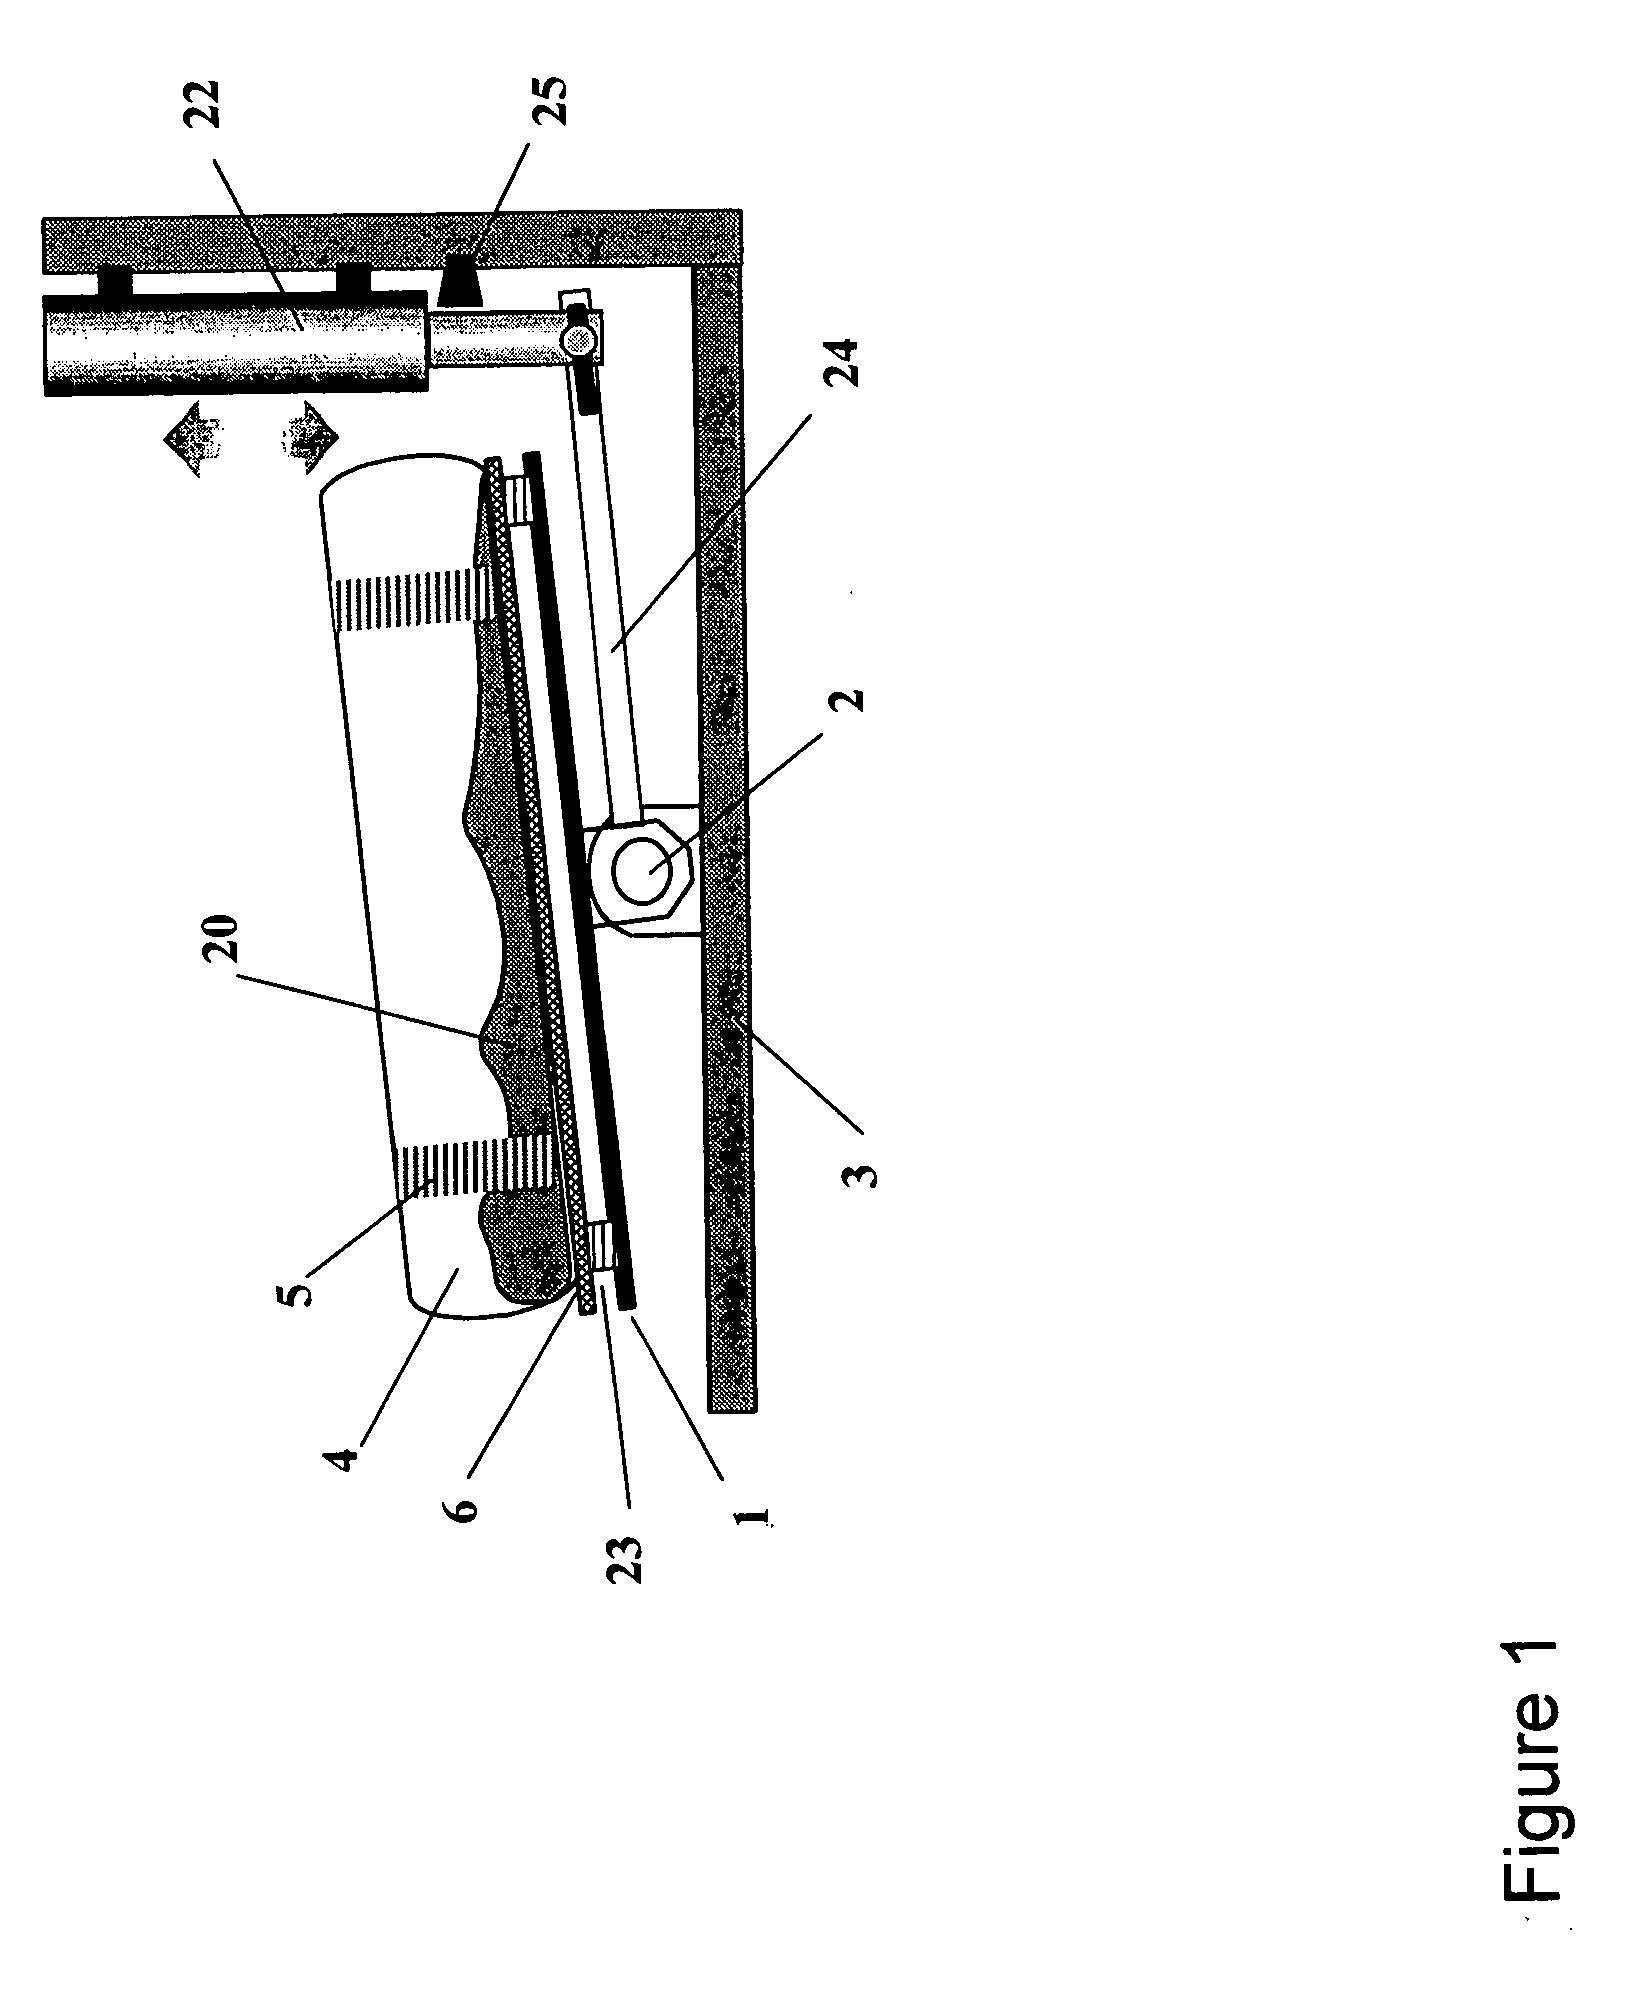 Method and apparatus for resonant wave mixing in closed containers